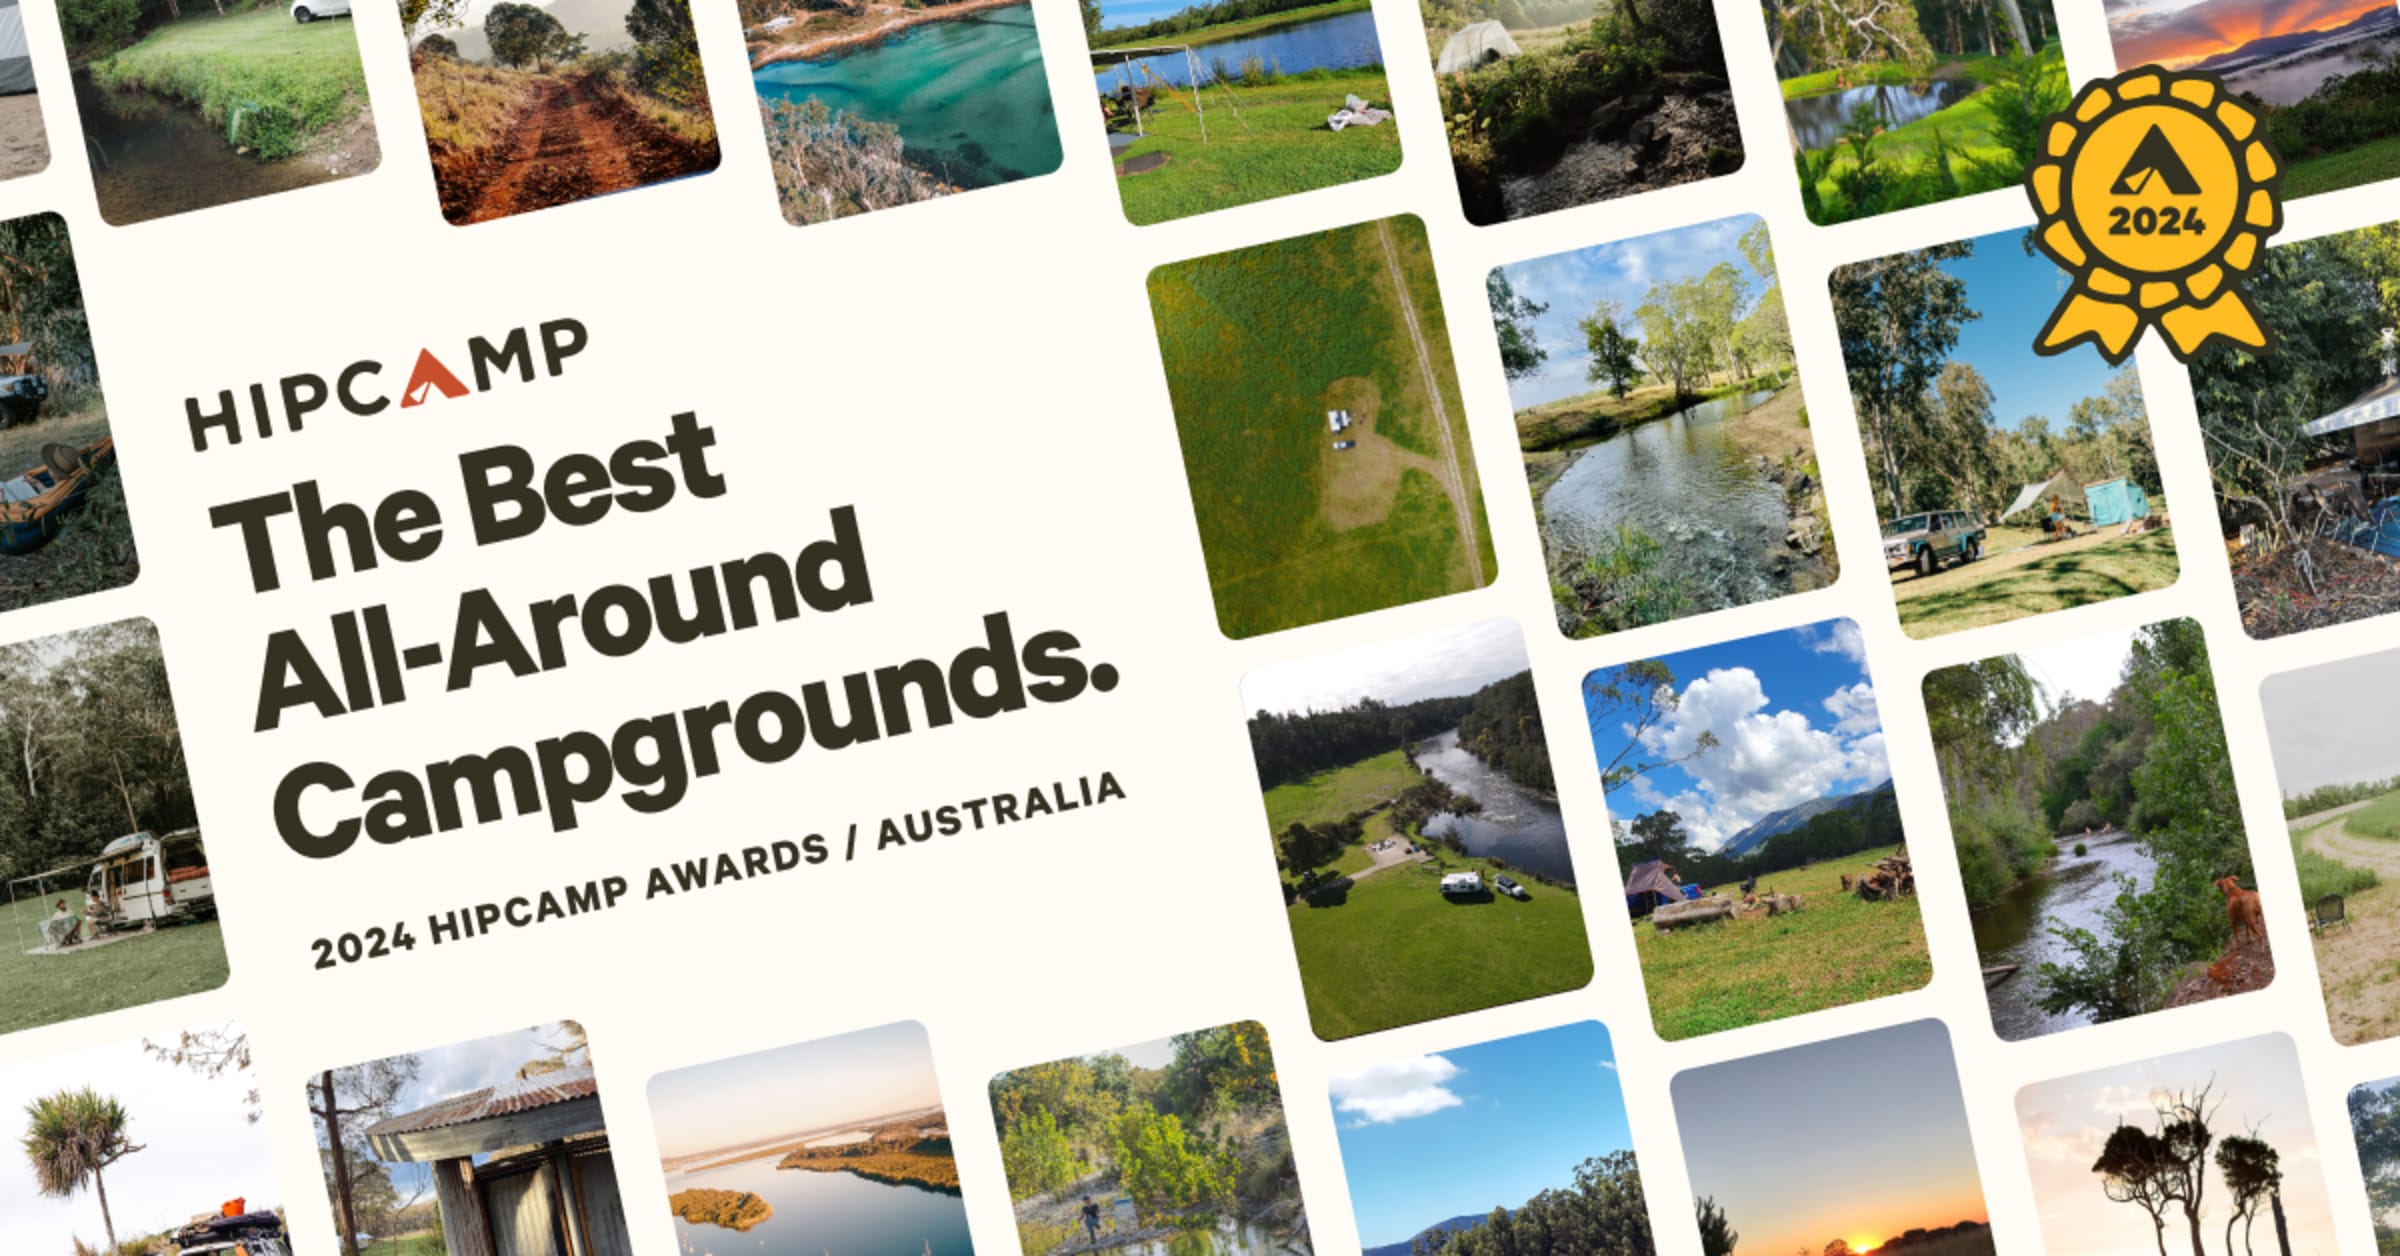 Hipcamp Awards 2024: Best All-Around Campgrounds in Australia